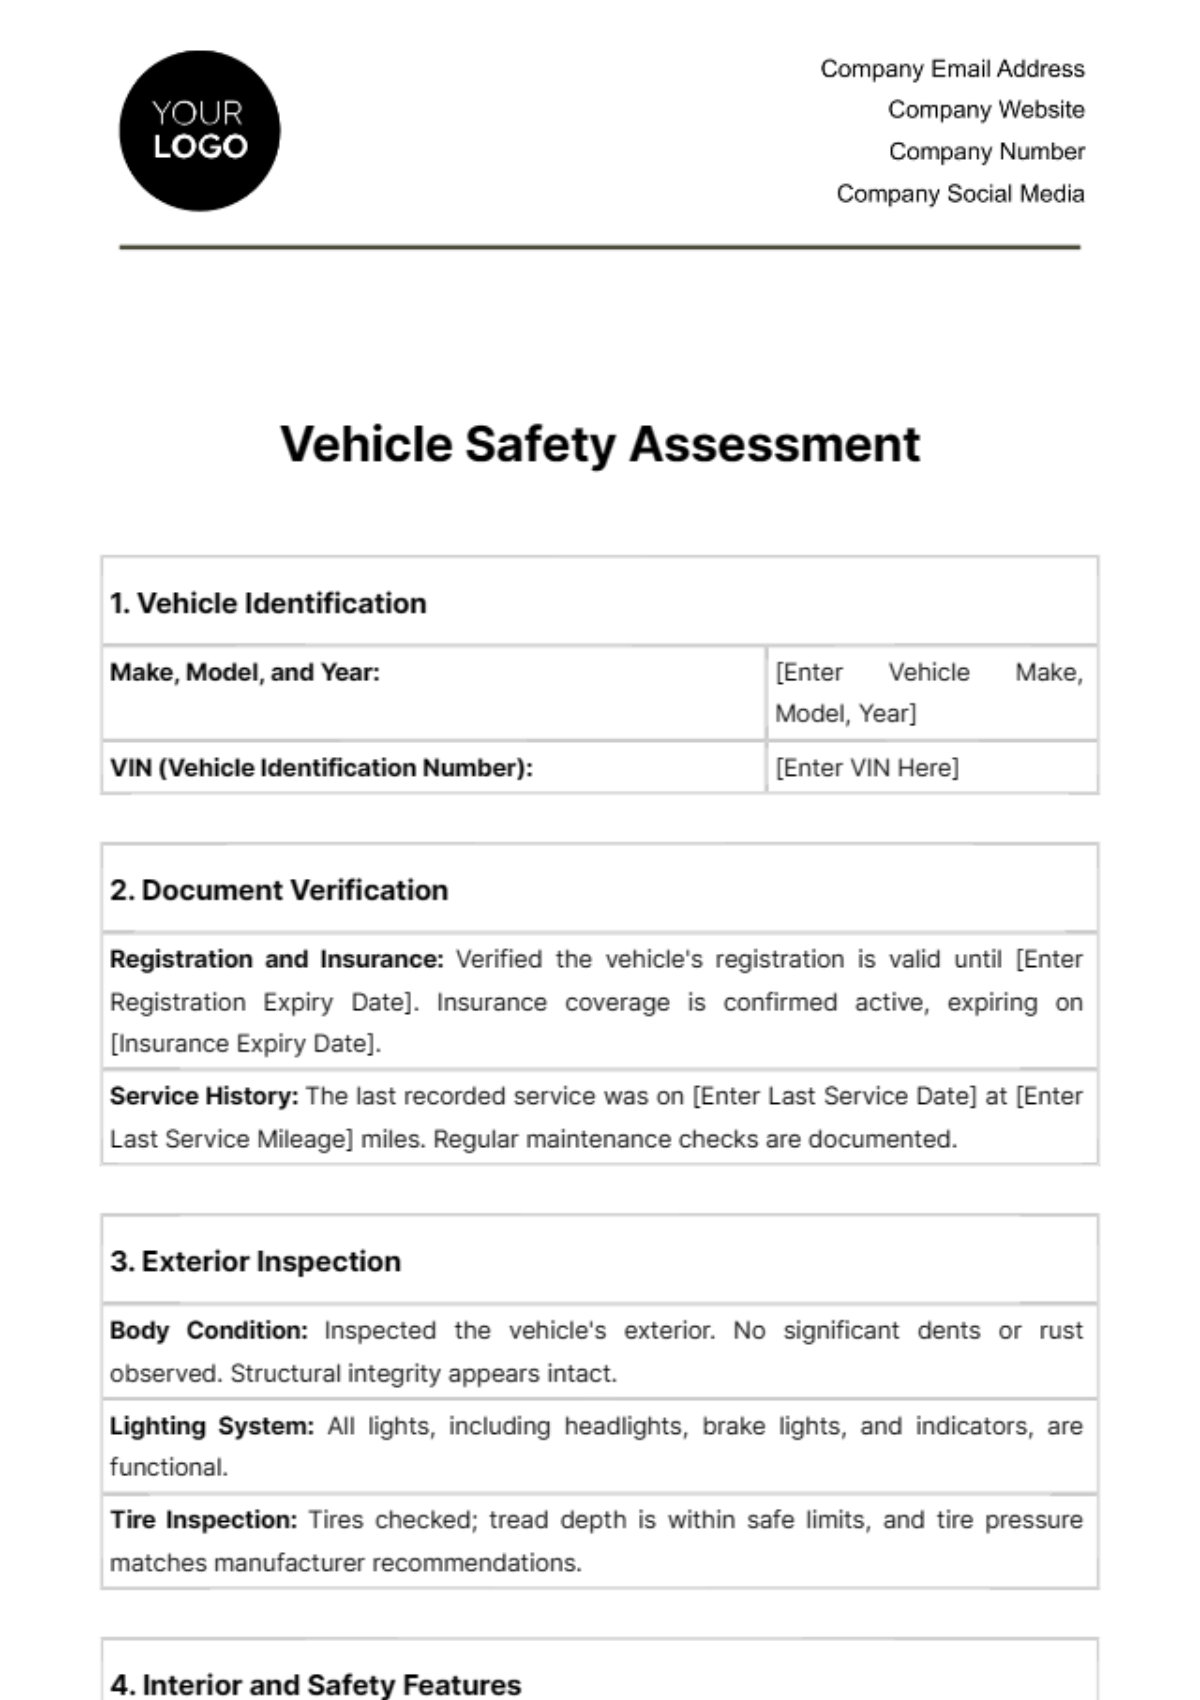 Free Vehicle Safety Assessment Template